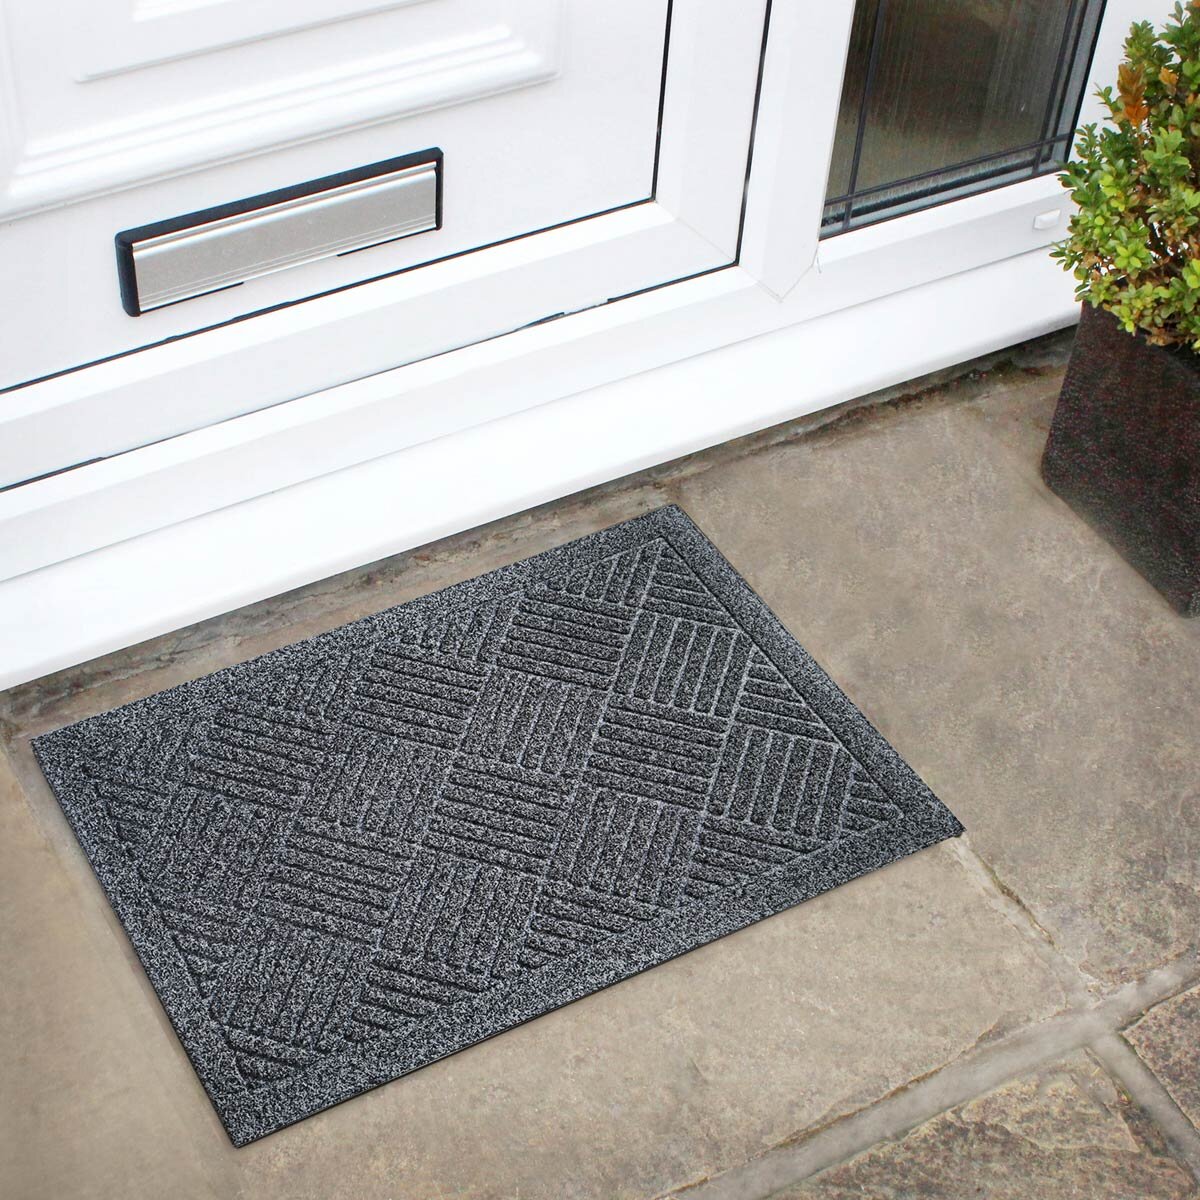 Lifestyle image of mats outside front door